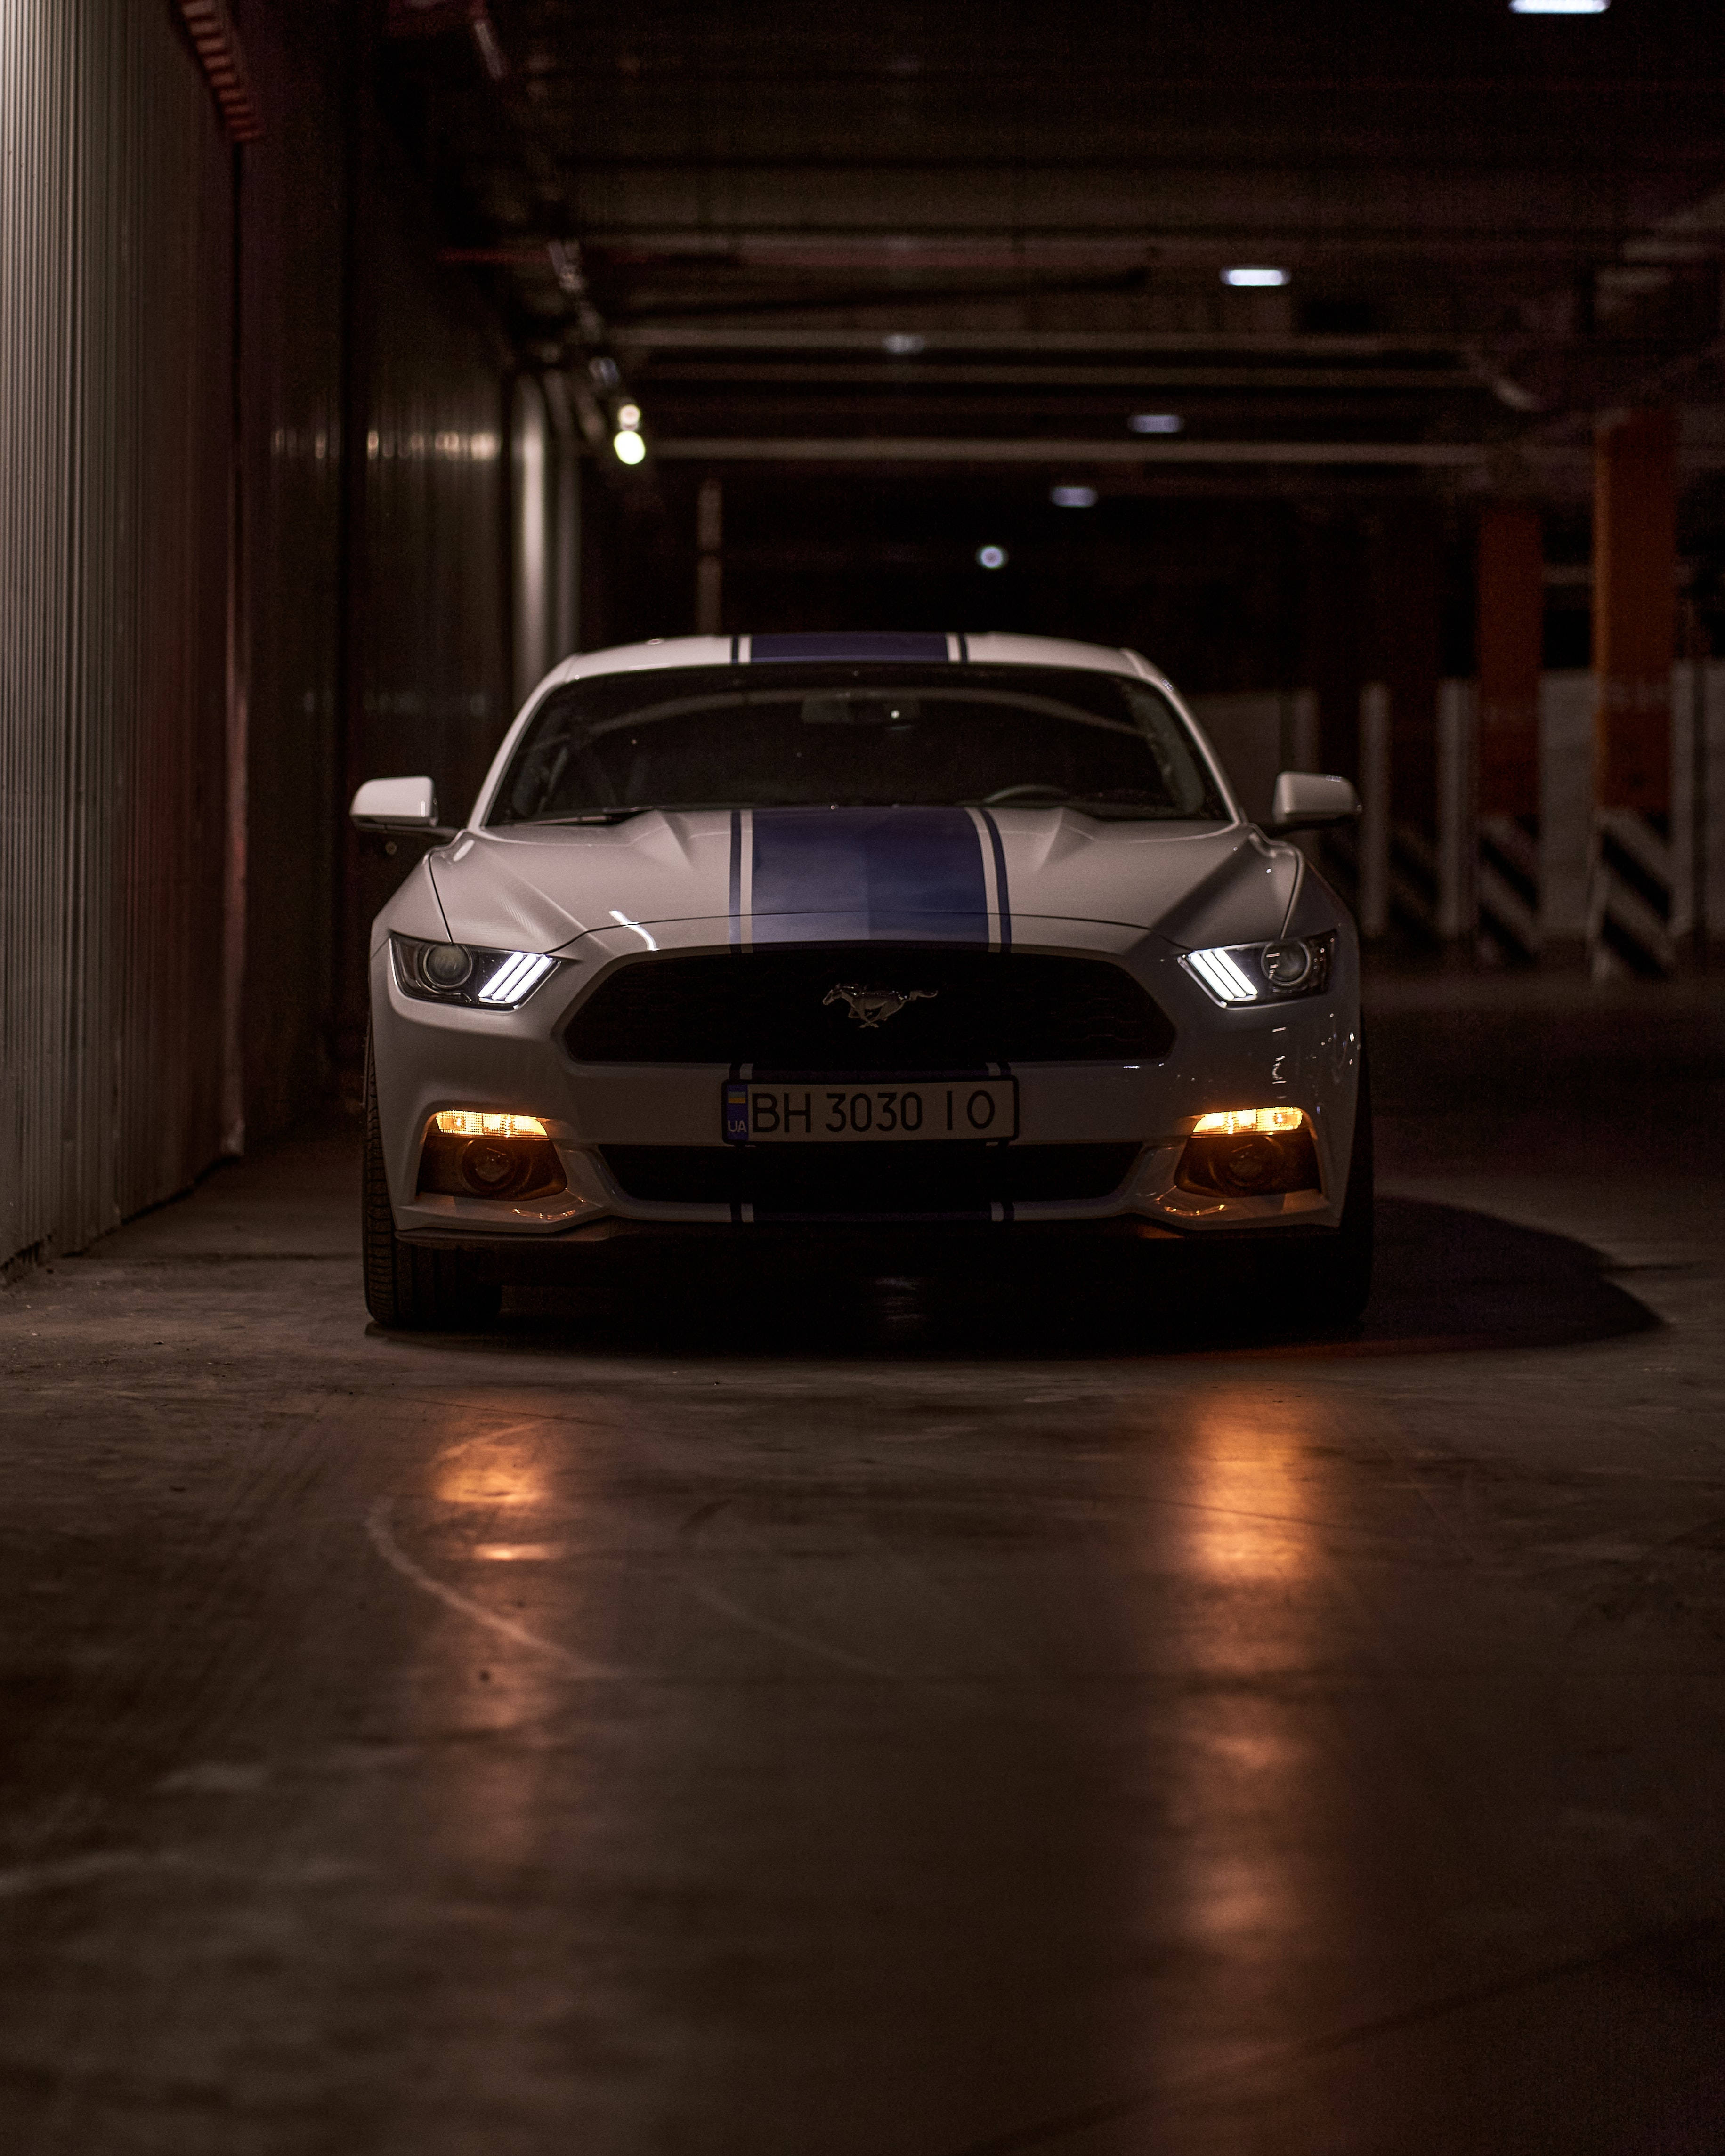 Ford Mustang Wallpaper for Smartphones INSTANT DOWNLOAD - Etsy